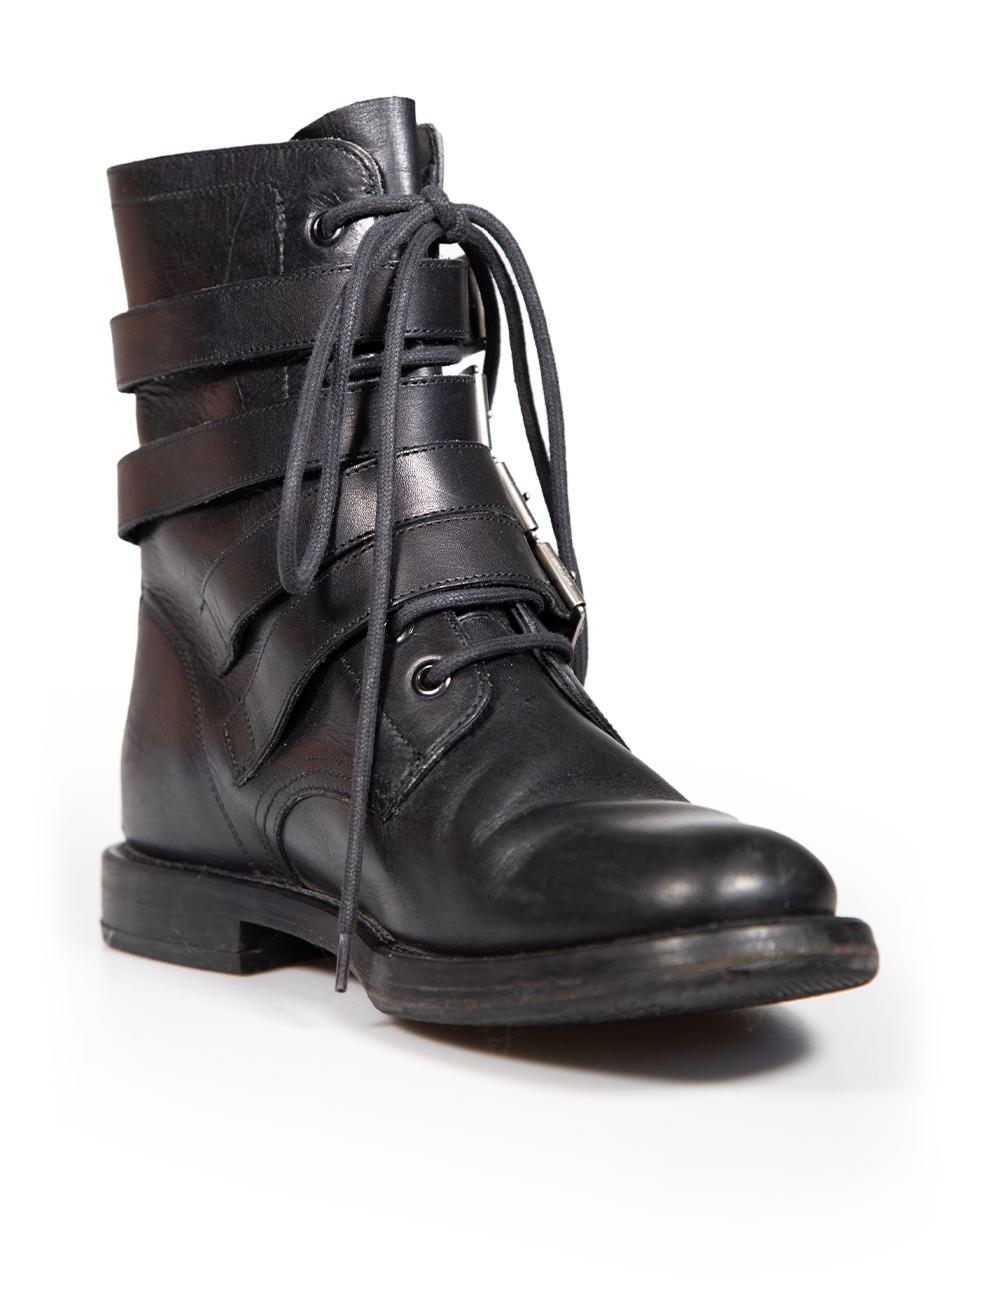 CONDITION is Very good. Minimal wear to boots is evident. Minimal wear to the uppers with scratches to the leather. there are marks to the heel on this used Saint Laurent designer resale item.
 
 
 
 Details
 
 
 Black
 
 Leather
 
 Combat boots
 
